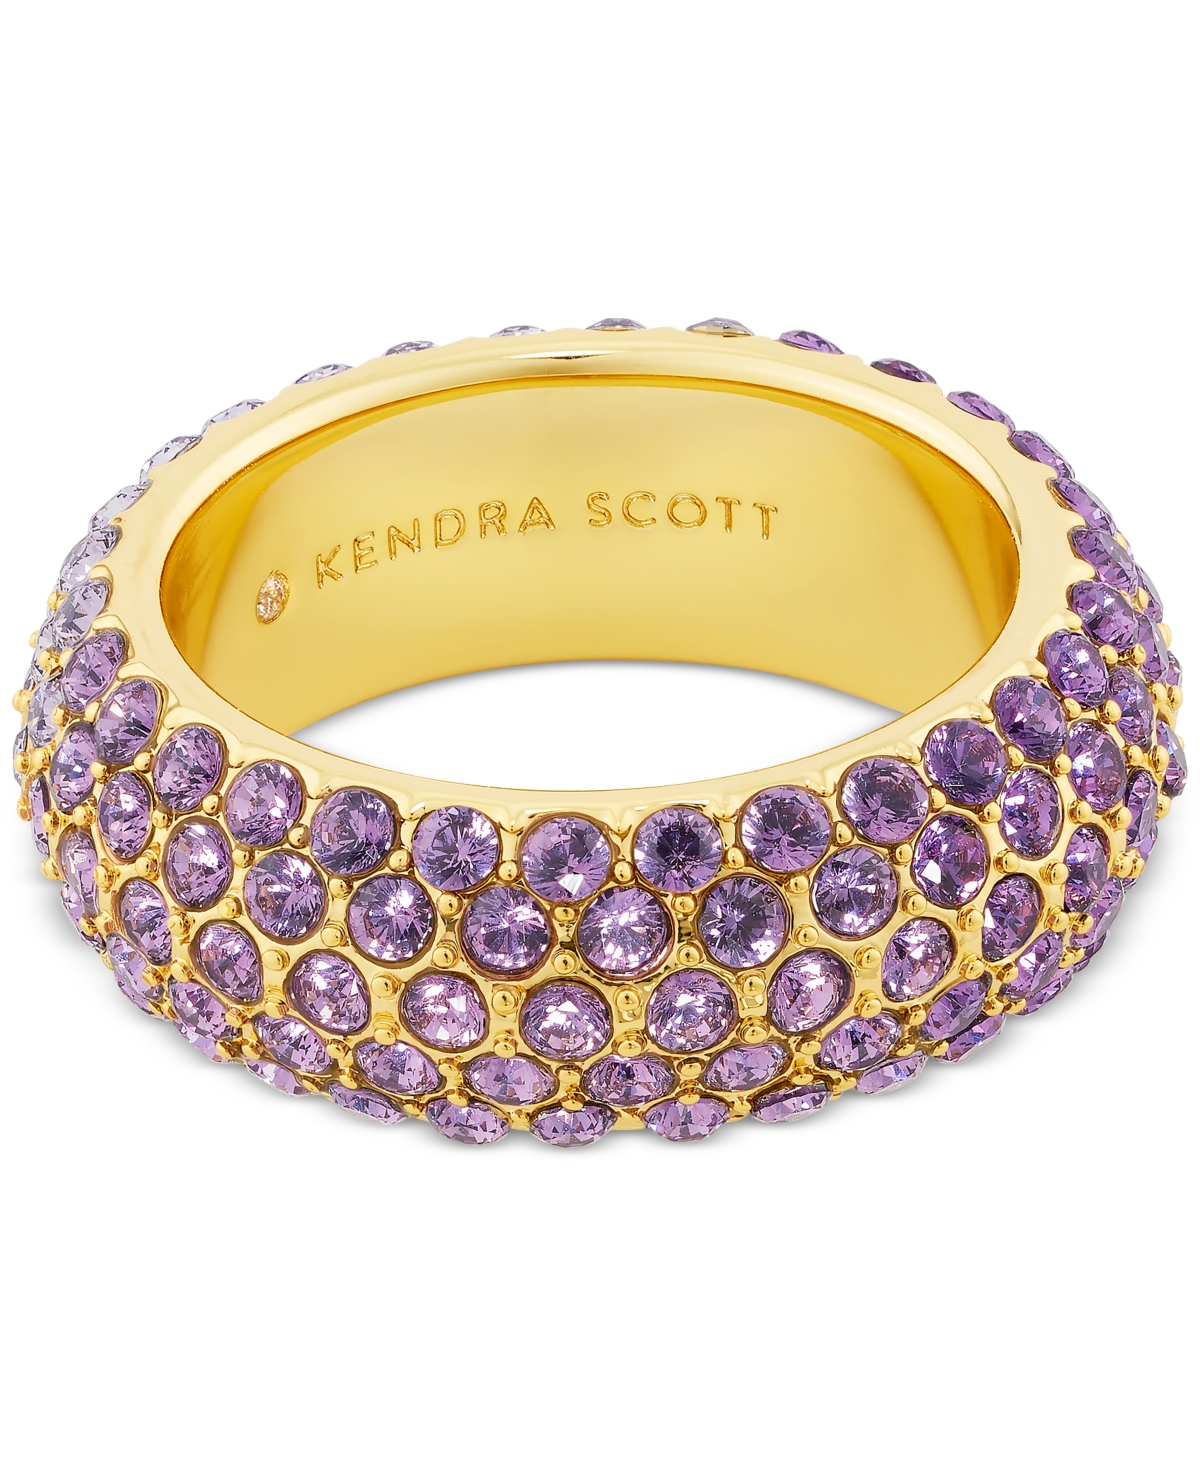 KENDRA SCOTT 14K GOLD-PLATED PAVE CHUNKY BAND RING